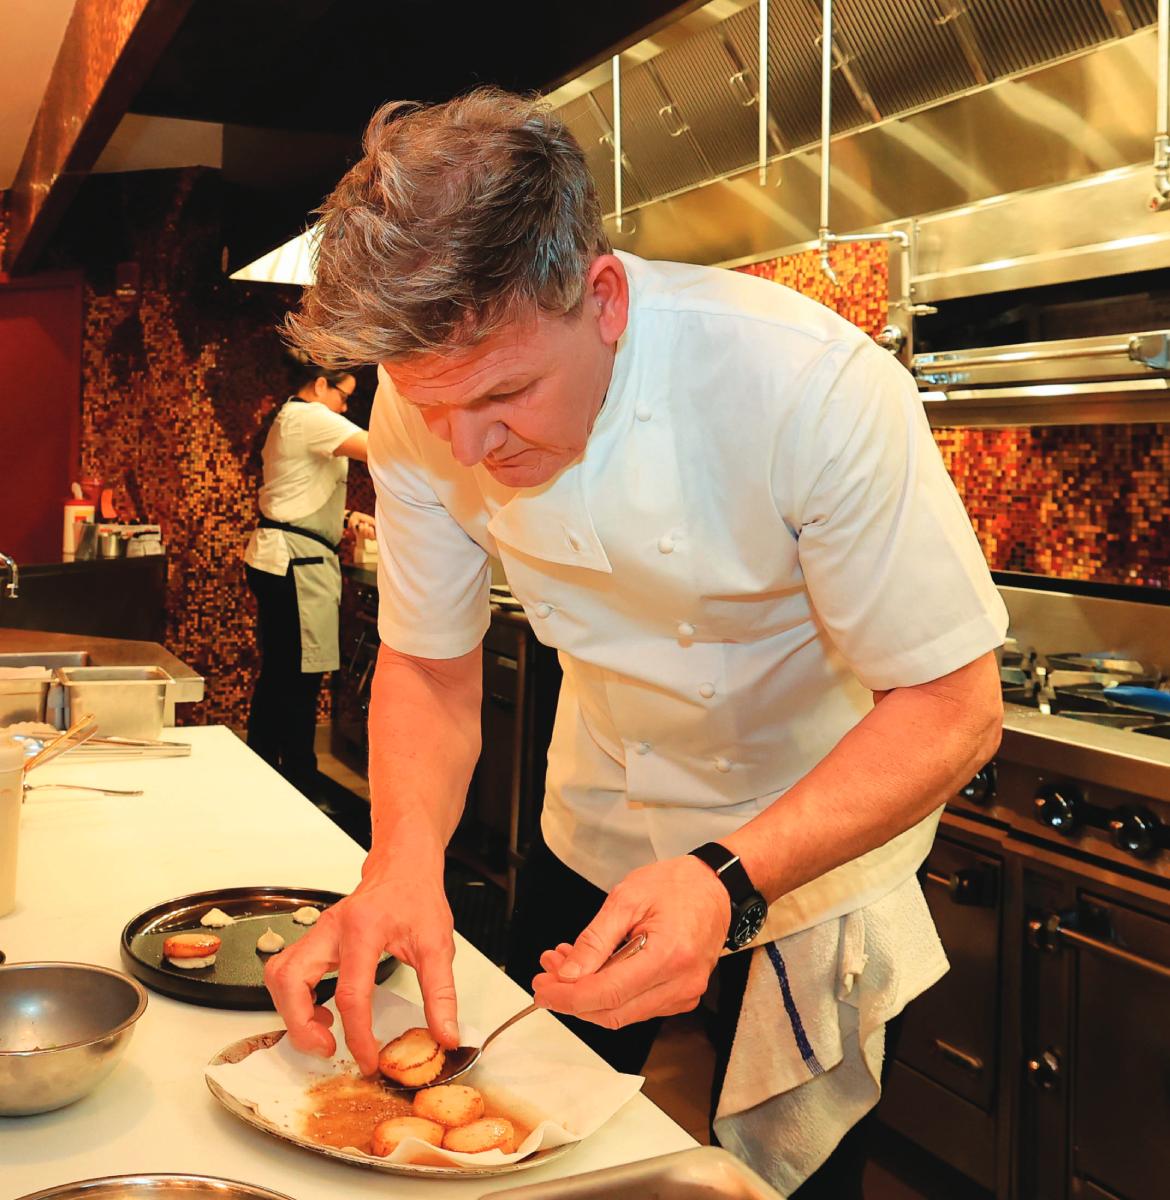 Gordon Ramsay at Hell’s Kitchen (Photo by Mike Manger, PhotoGraphics)